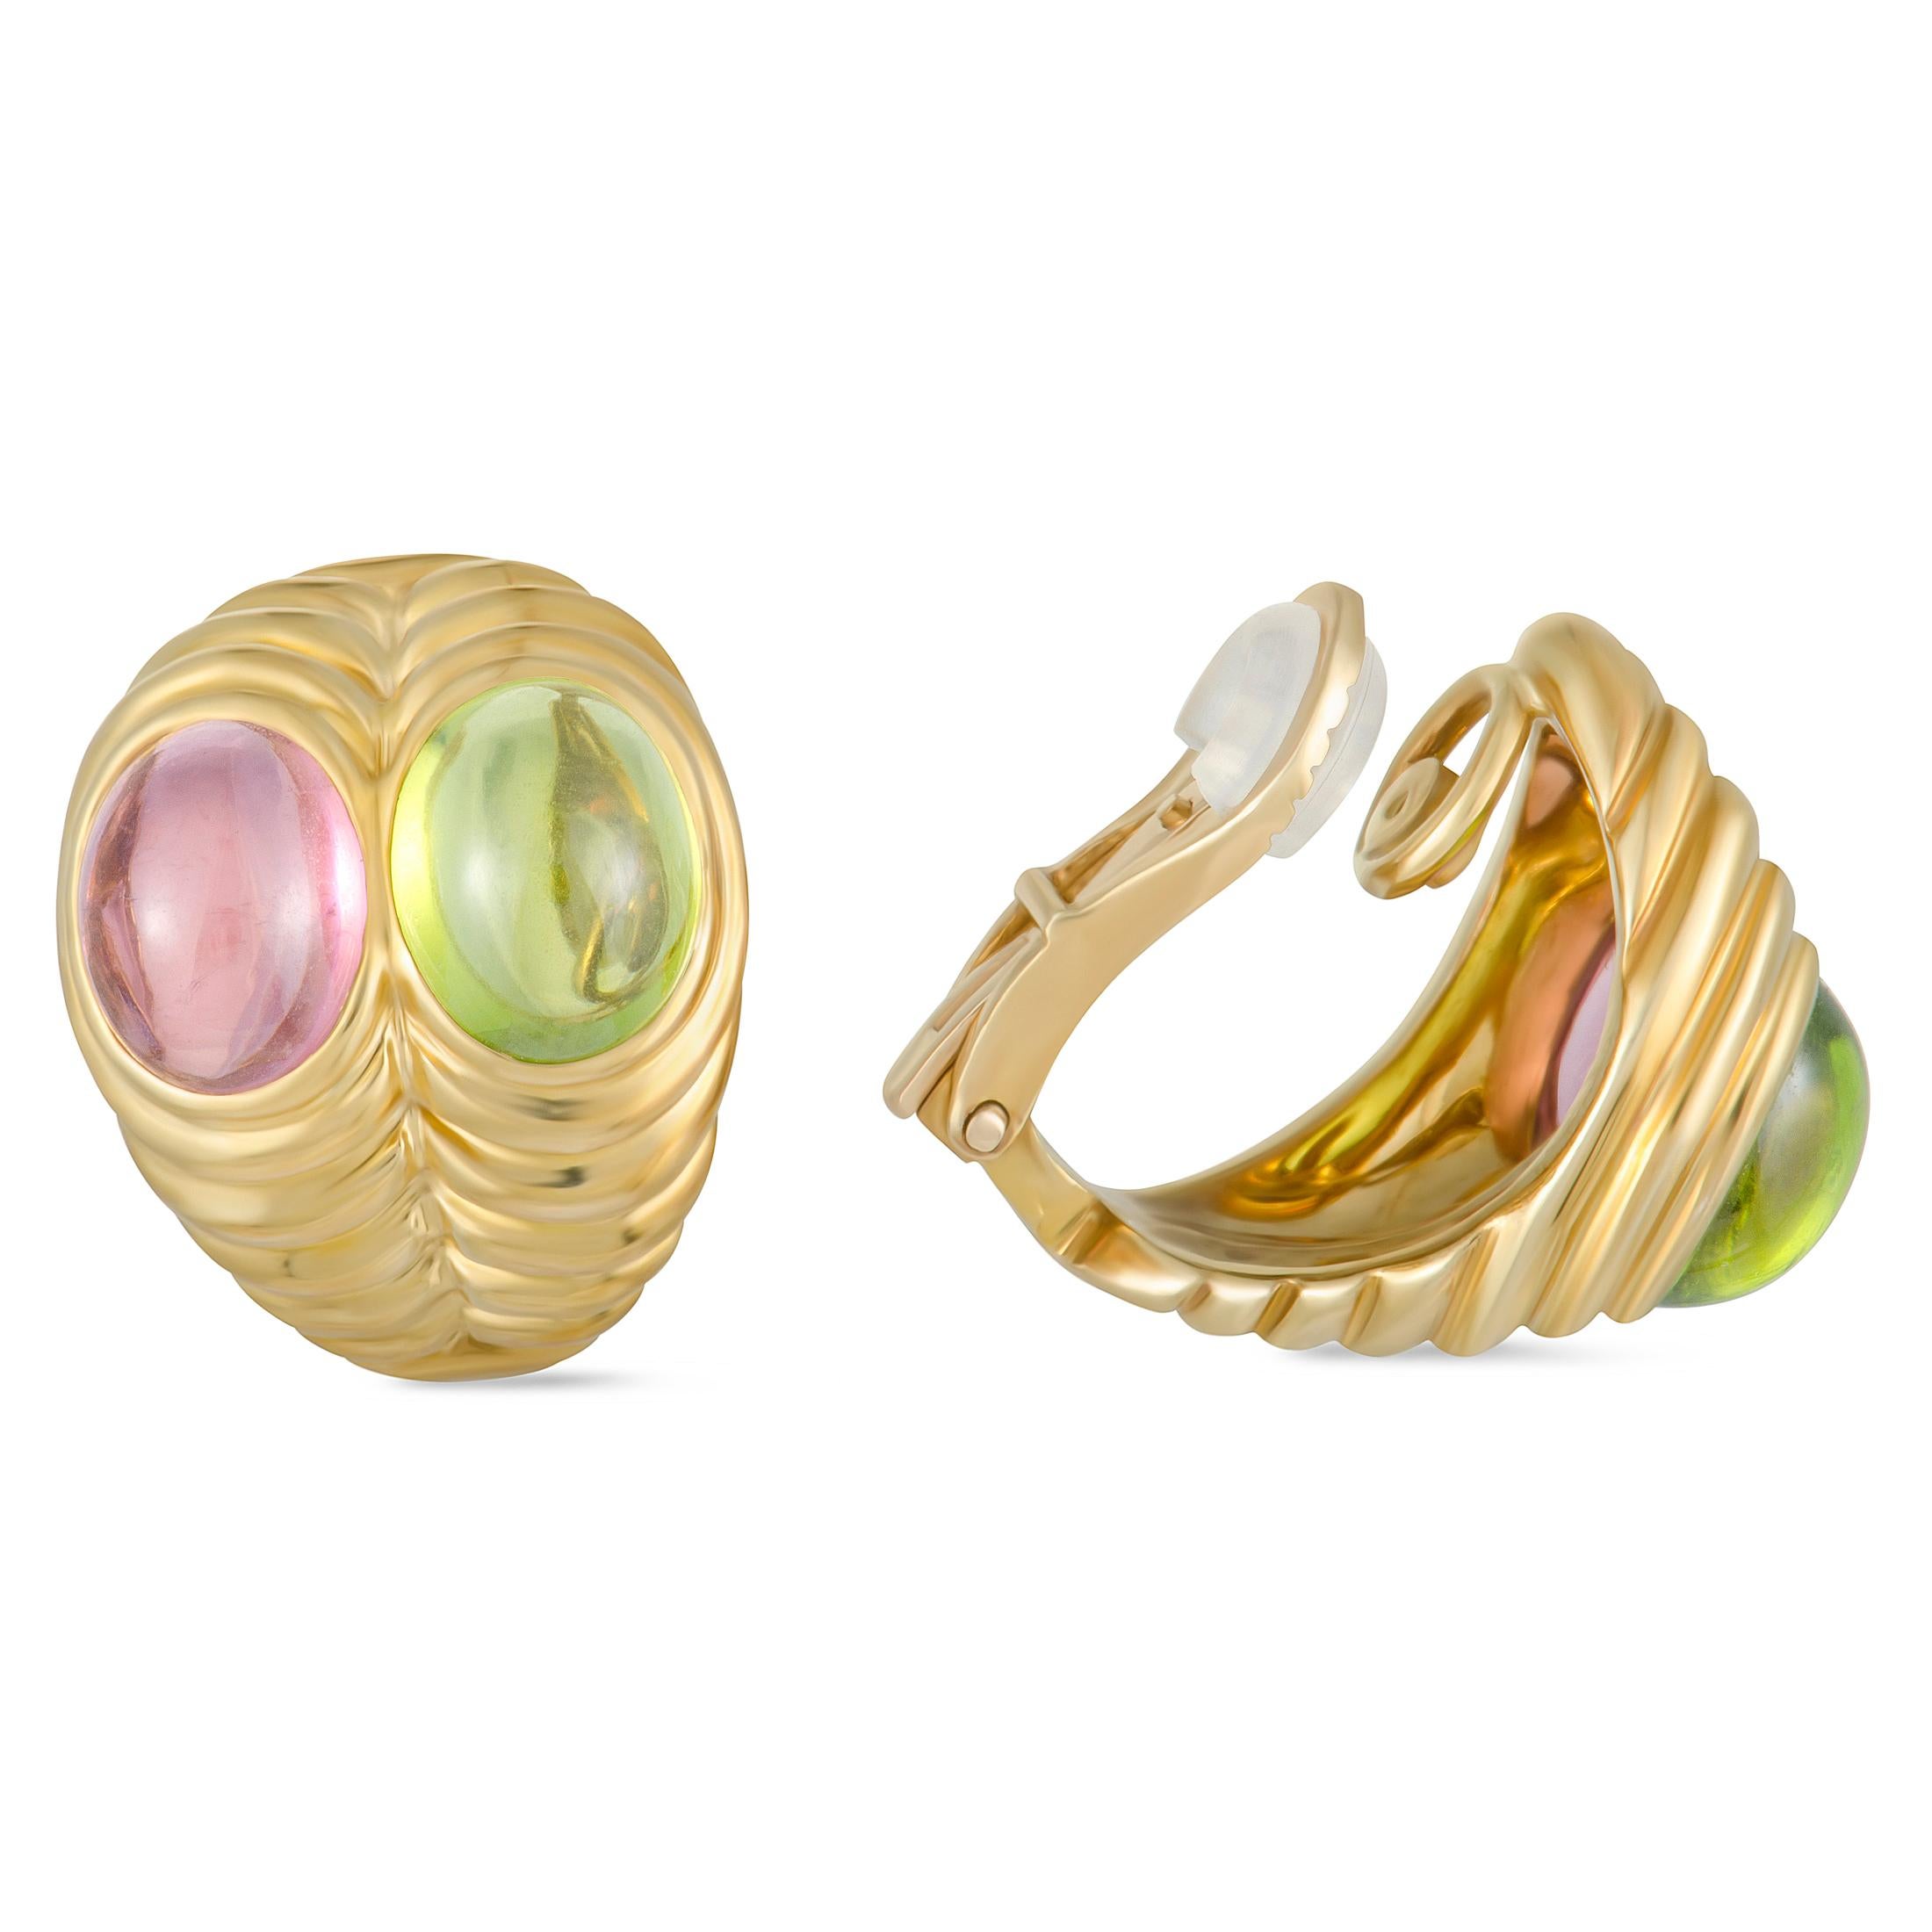 The enchanting radiance of gold in this fascinating pair of earrings is beautifully accentuated by the incredibly vivacious peridots and pink tourmalines. The pair is wonderfully designed by Bvlgari and exquisitely crafted from 18K yellow gold, with